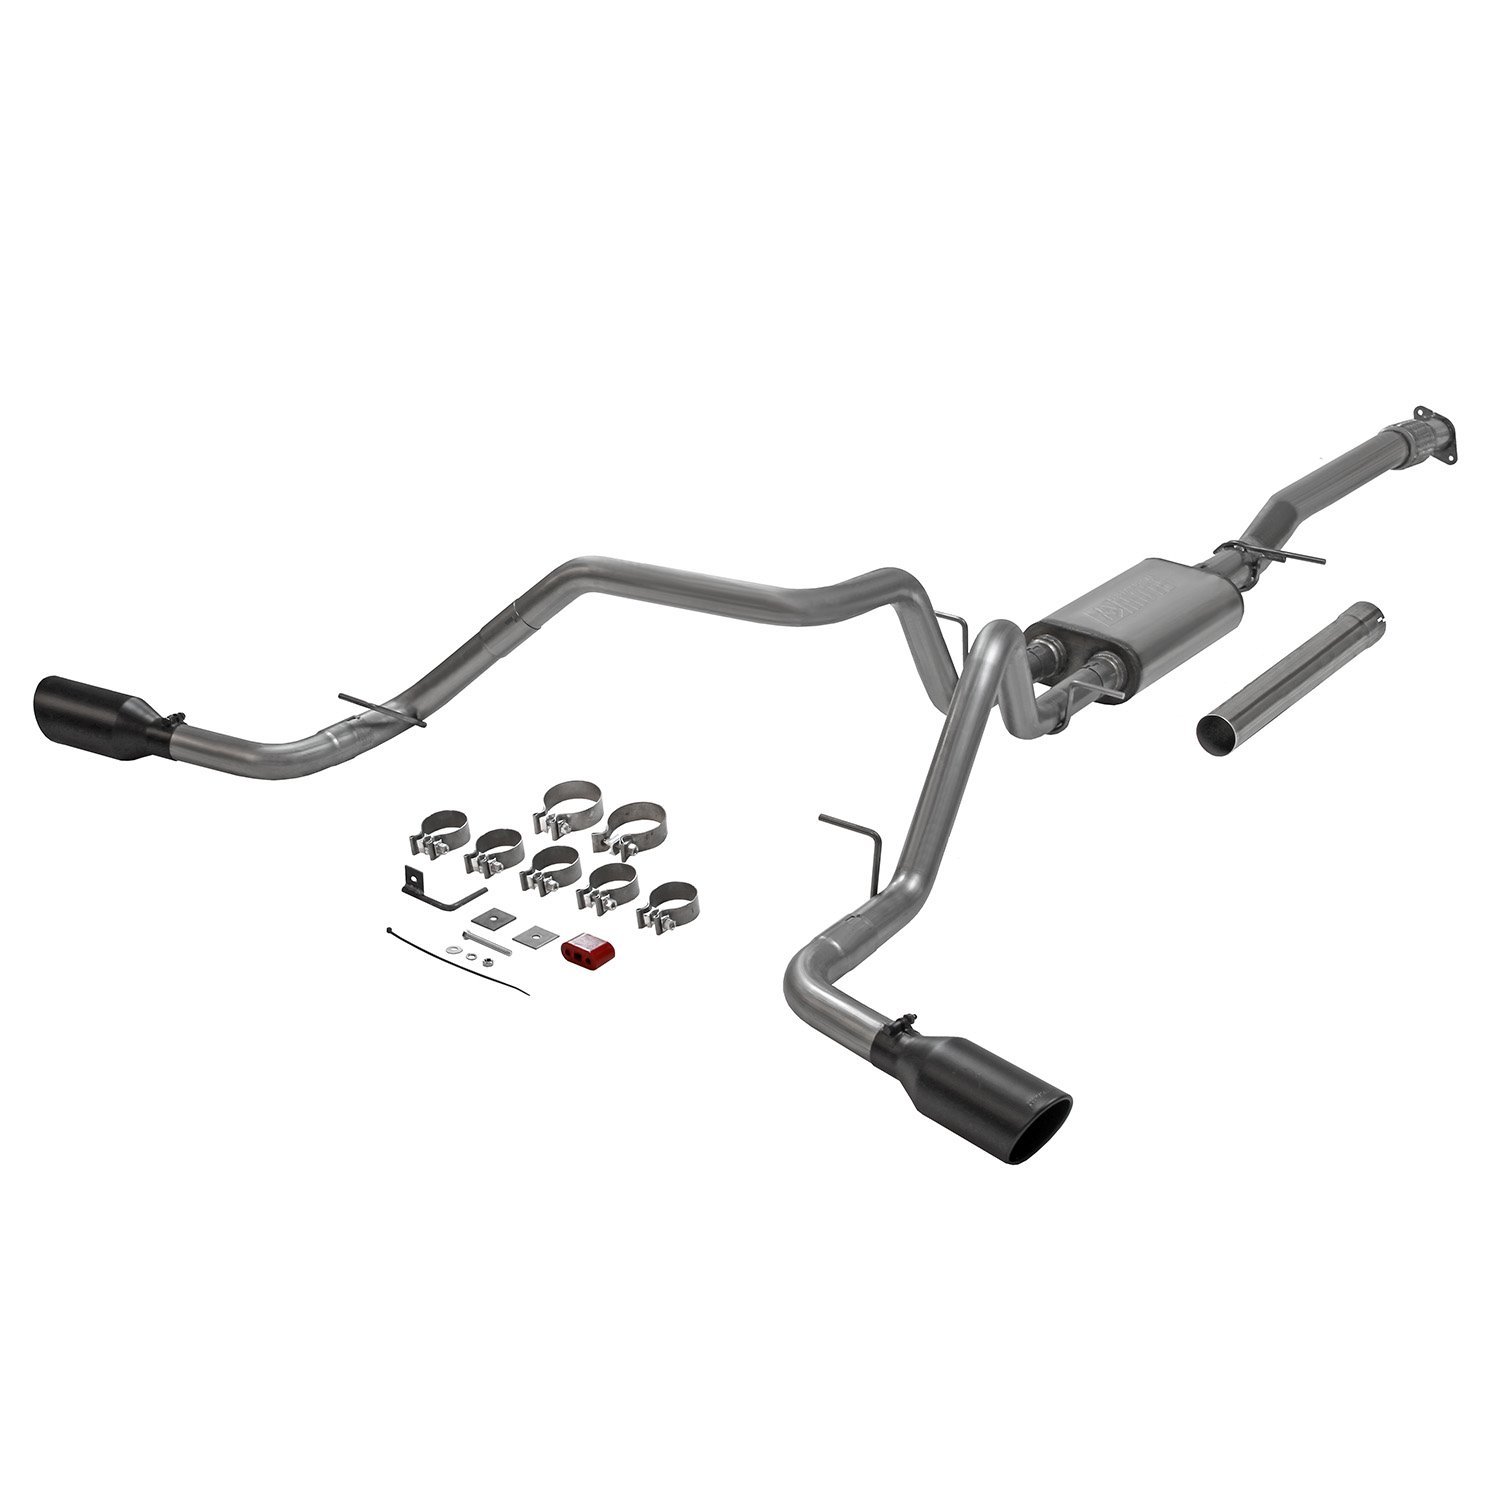 FlowFX Cat-Back Exhaust System Fits Select Chevrolet Silverado 1500 and GMC Sierra 1500  2.7L Trucks [147/157 in. WB]